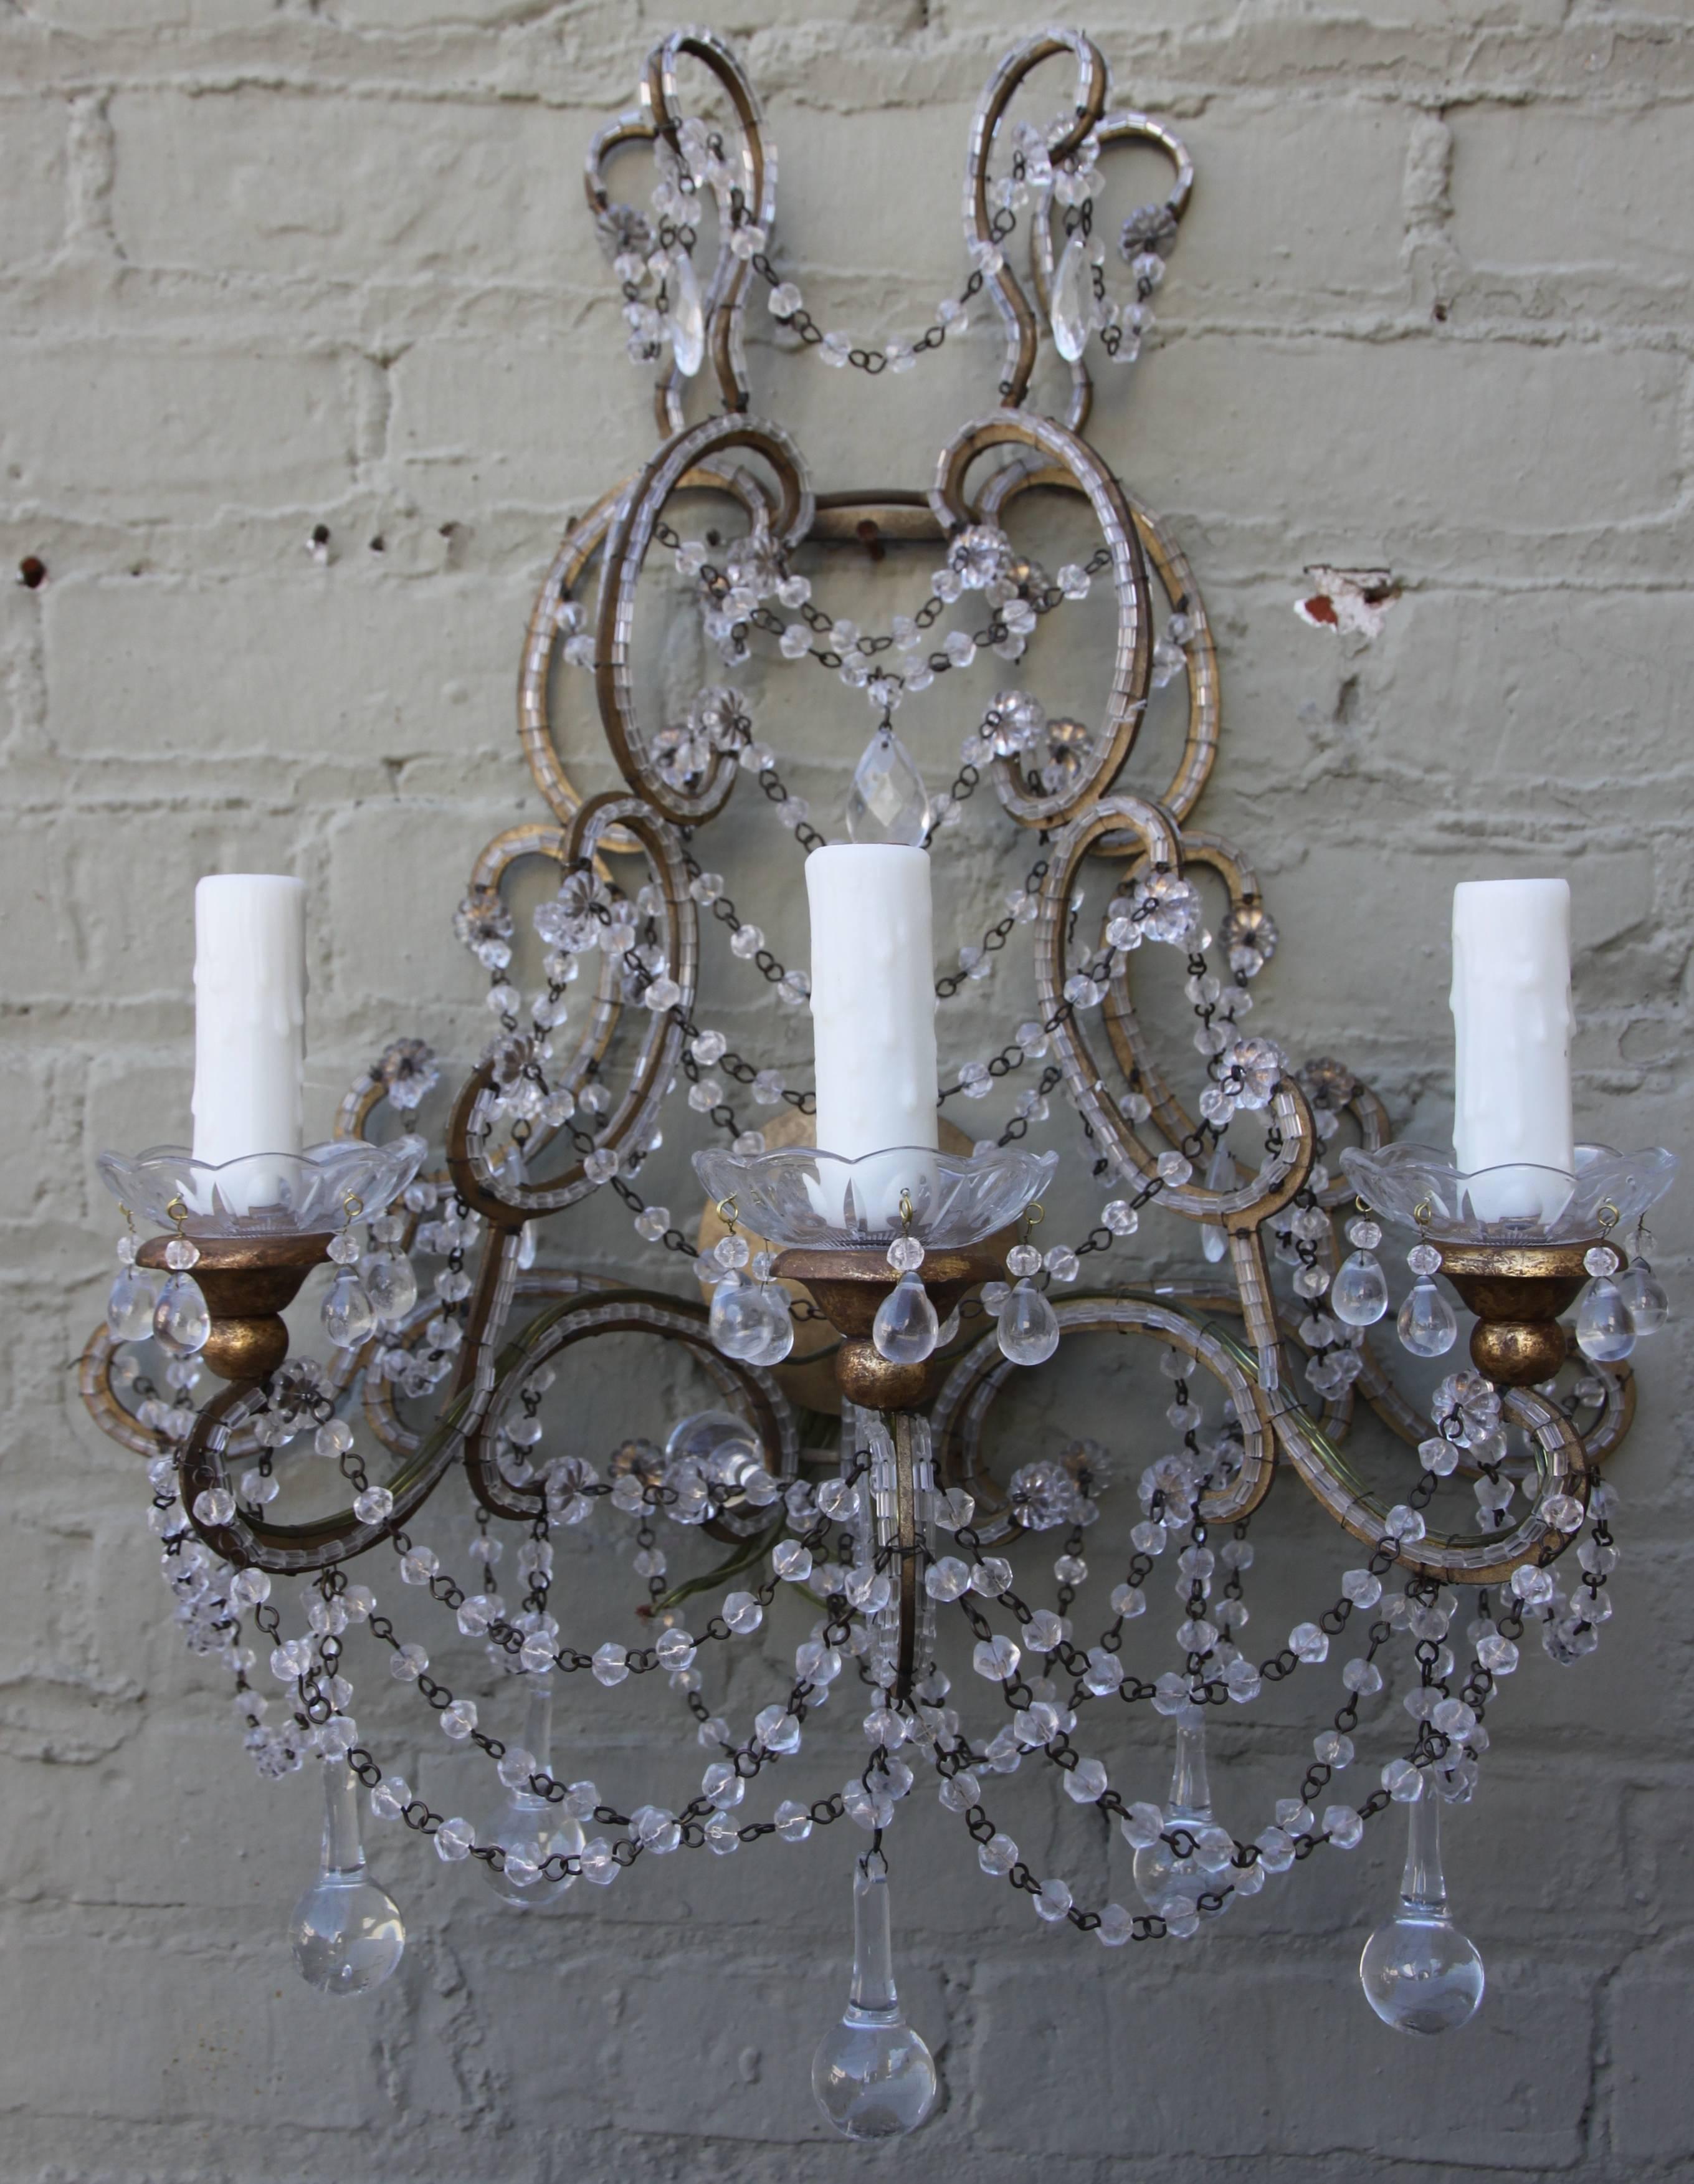 Pair of Italian three-light crystal beaded sconces with garlands of macaroni beads and clear drops throughout. The sconces have been newly rewired with drip wax candle covers.